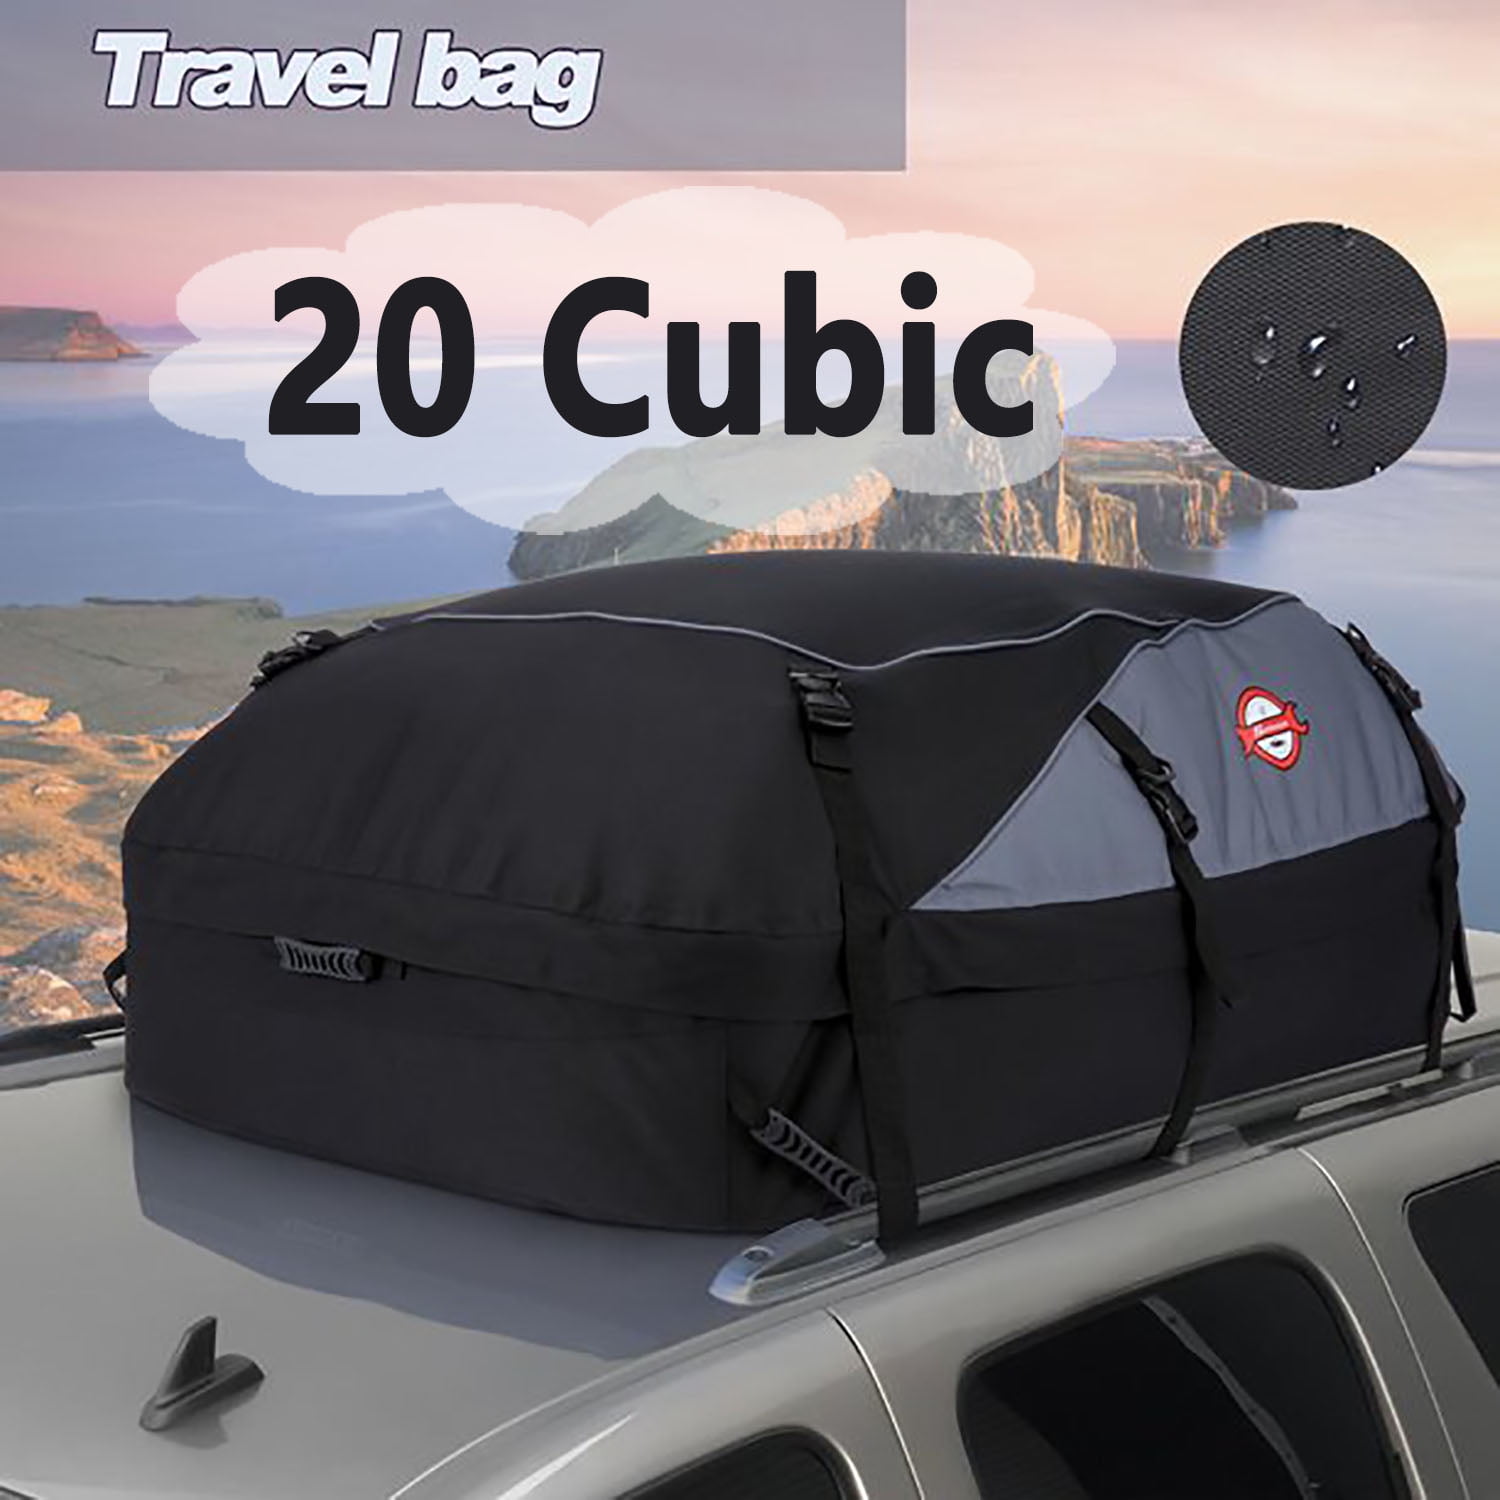 Thickened - 20 Cubic 20 Cubic Car Cargo Roof Bag Easy to Install Soft Rooftop Luggage Carriers with Wide Straps 20 Cubic Feet Waterproof Duty Car Roof Top Carrier 